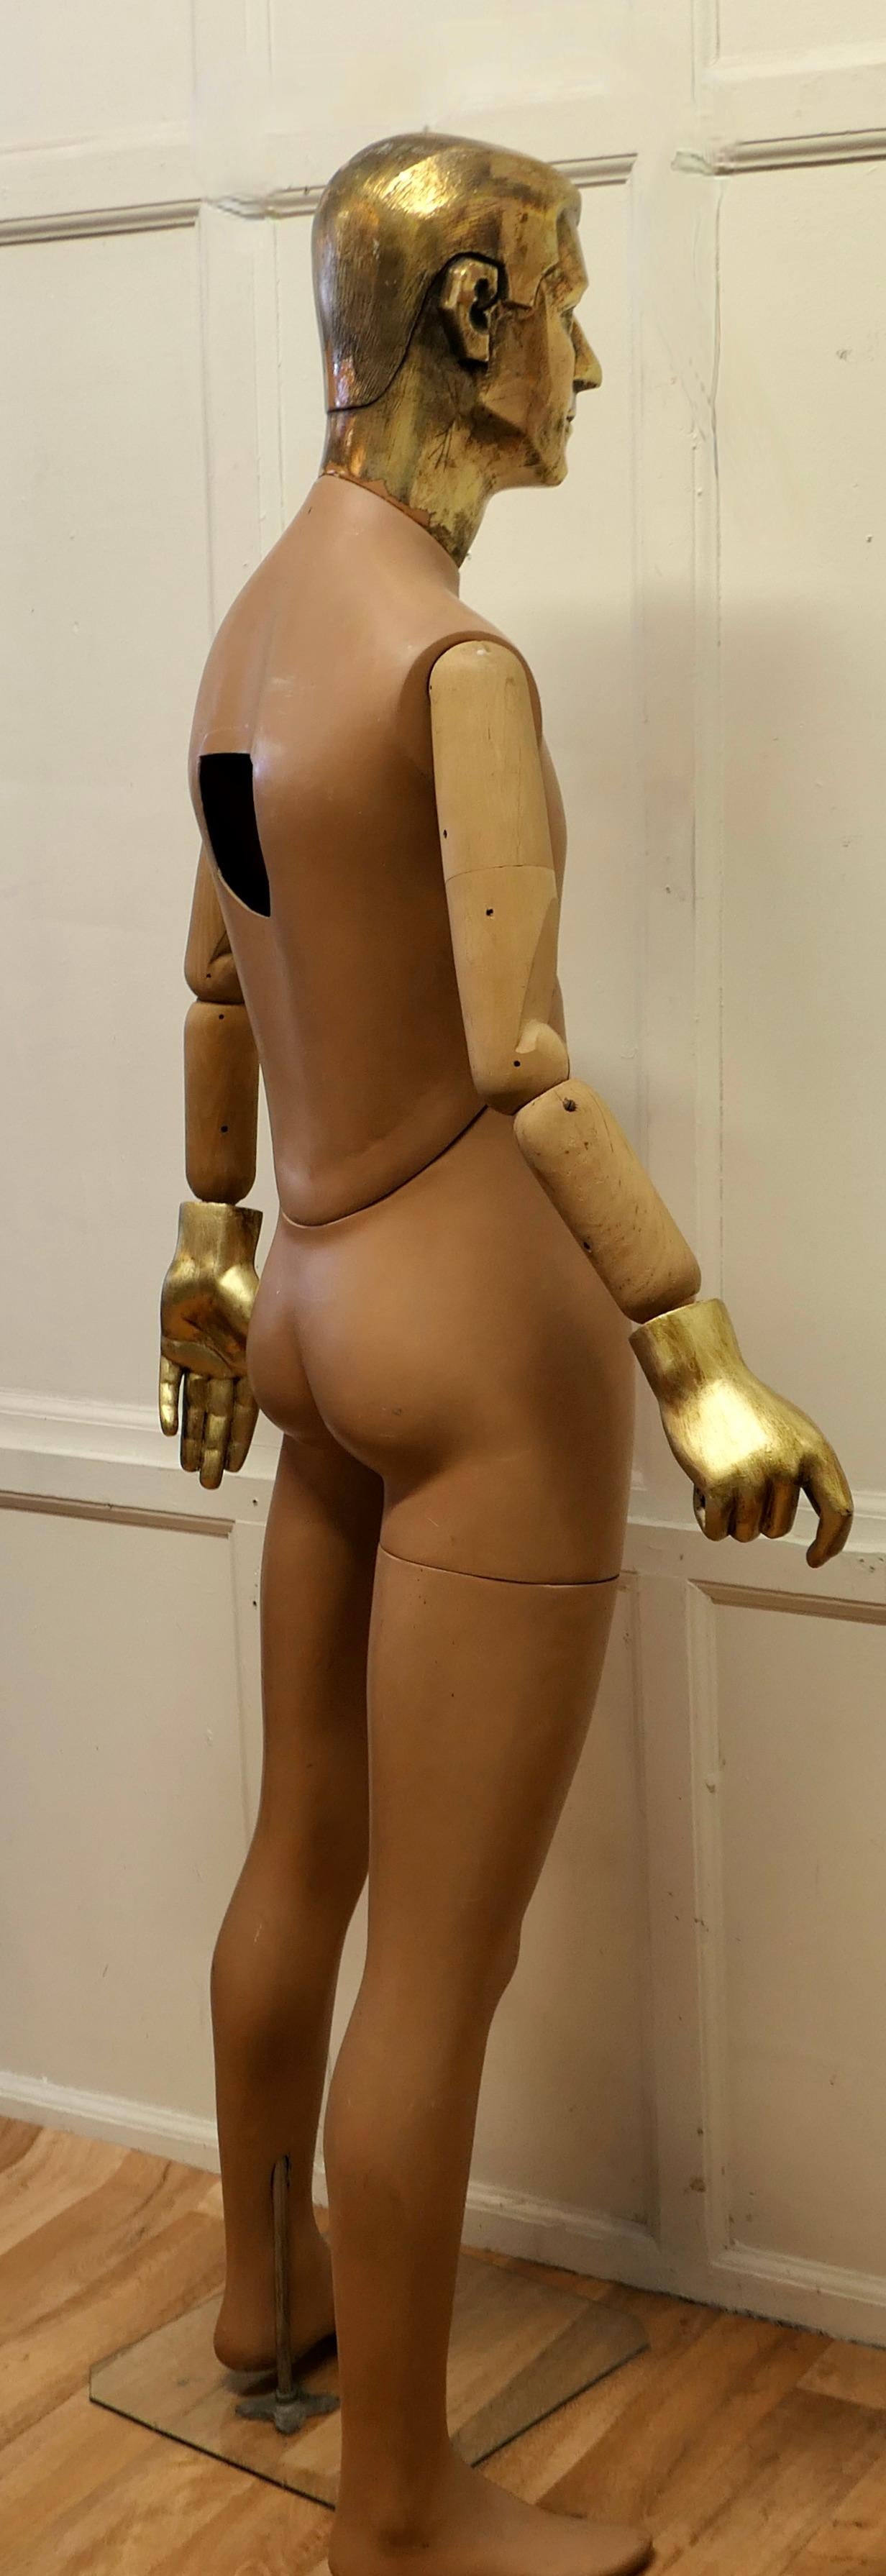 Quirky Offbeat Vintage Male Shop Mannequin For Sale 2